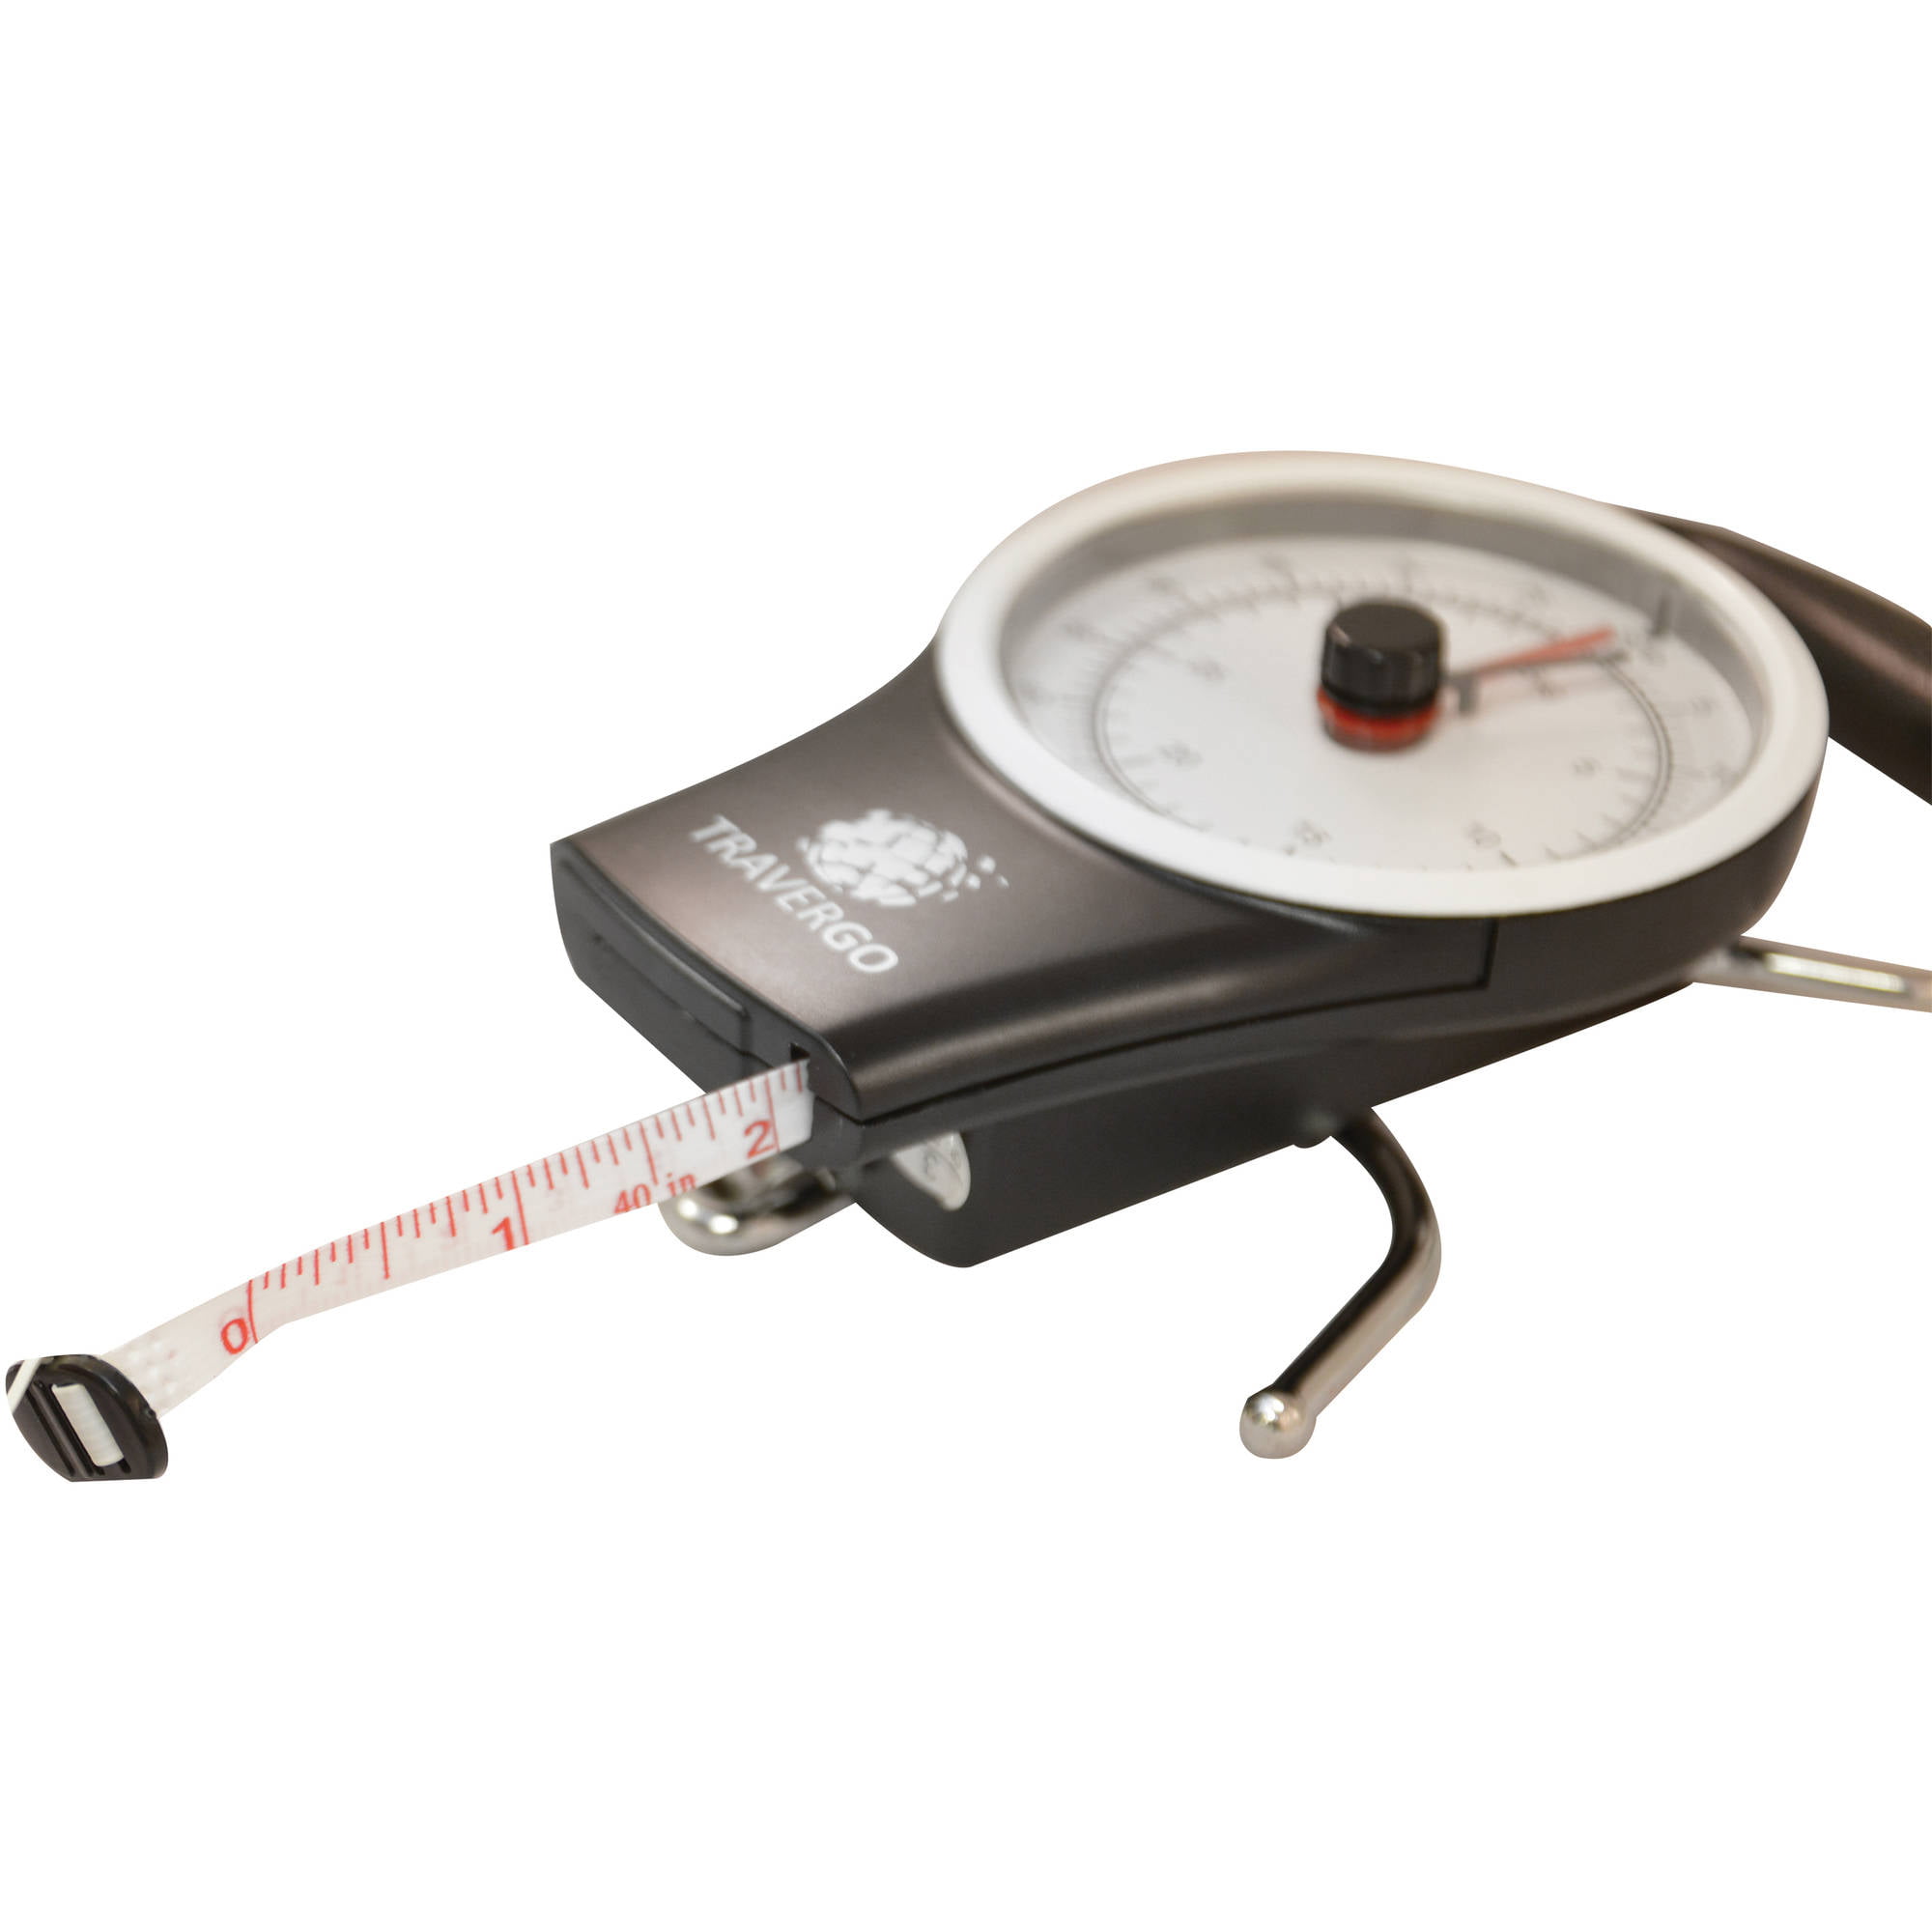 The B1 Travel Luggage Scale - HPG - Promotional Products Supplier